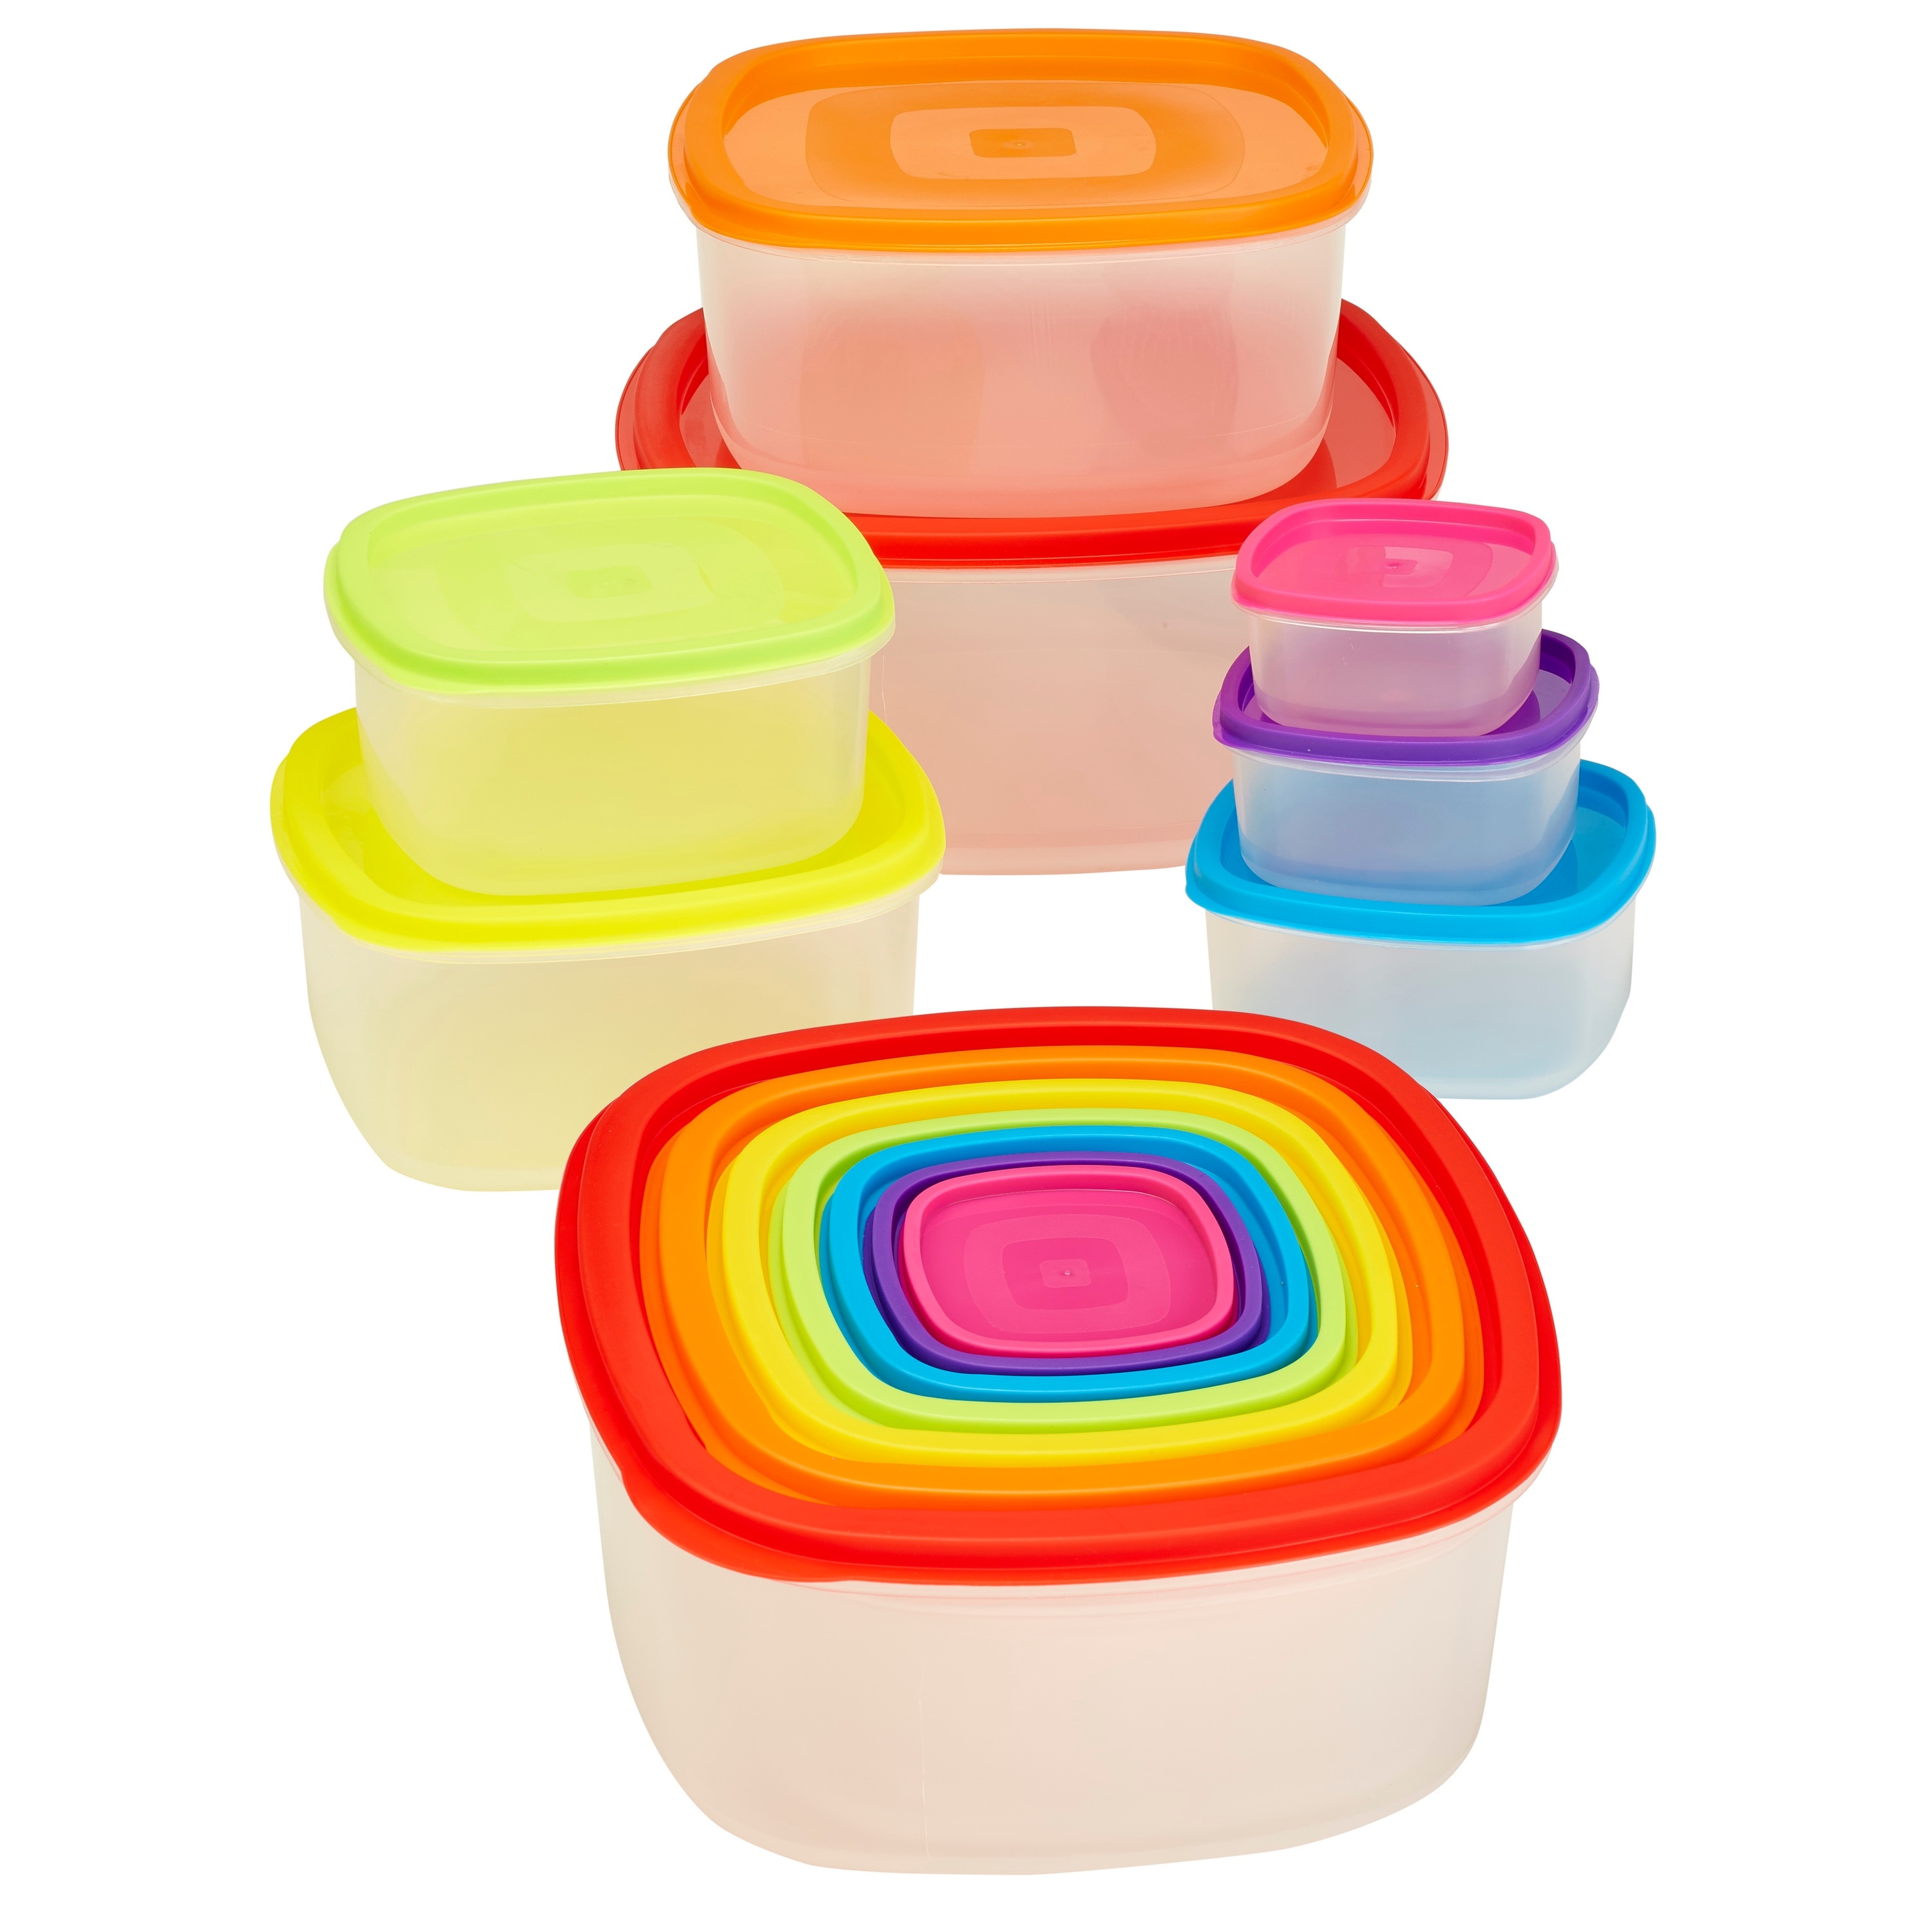 https://ak1.ostkcdn.com/images/products/is/images/direct/988dcced039988e84703c6b4f3e901aba0eeb869/Kitchen-Details-14-piece-Medium-Rainbow-Nested-Food-Storage-Set.jpg